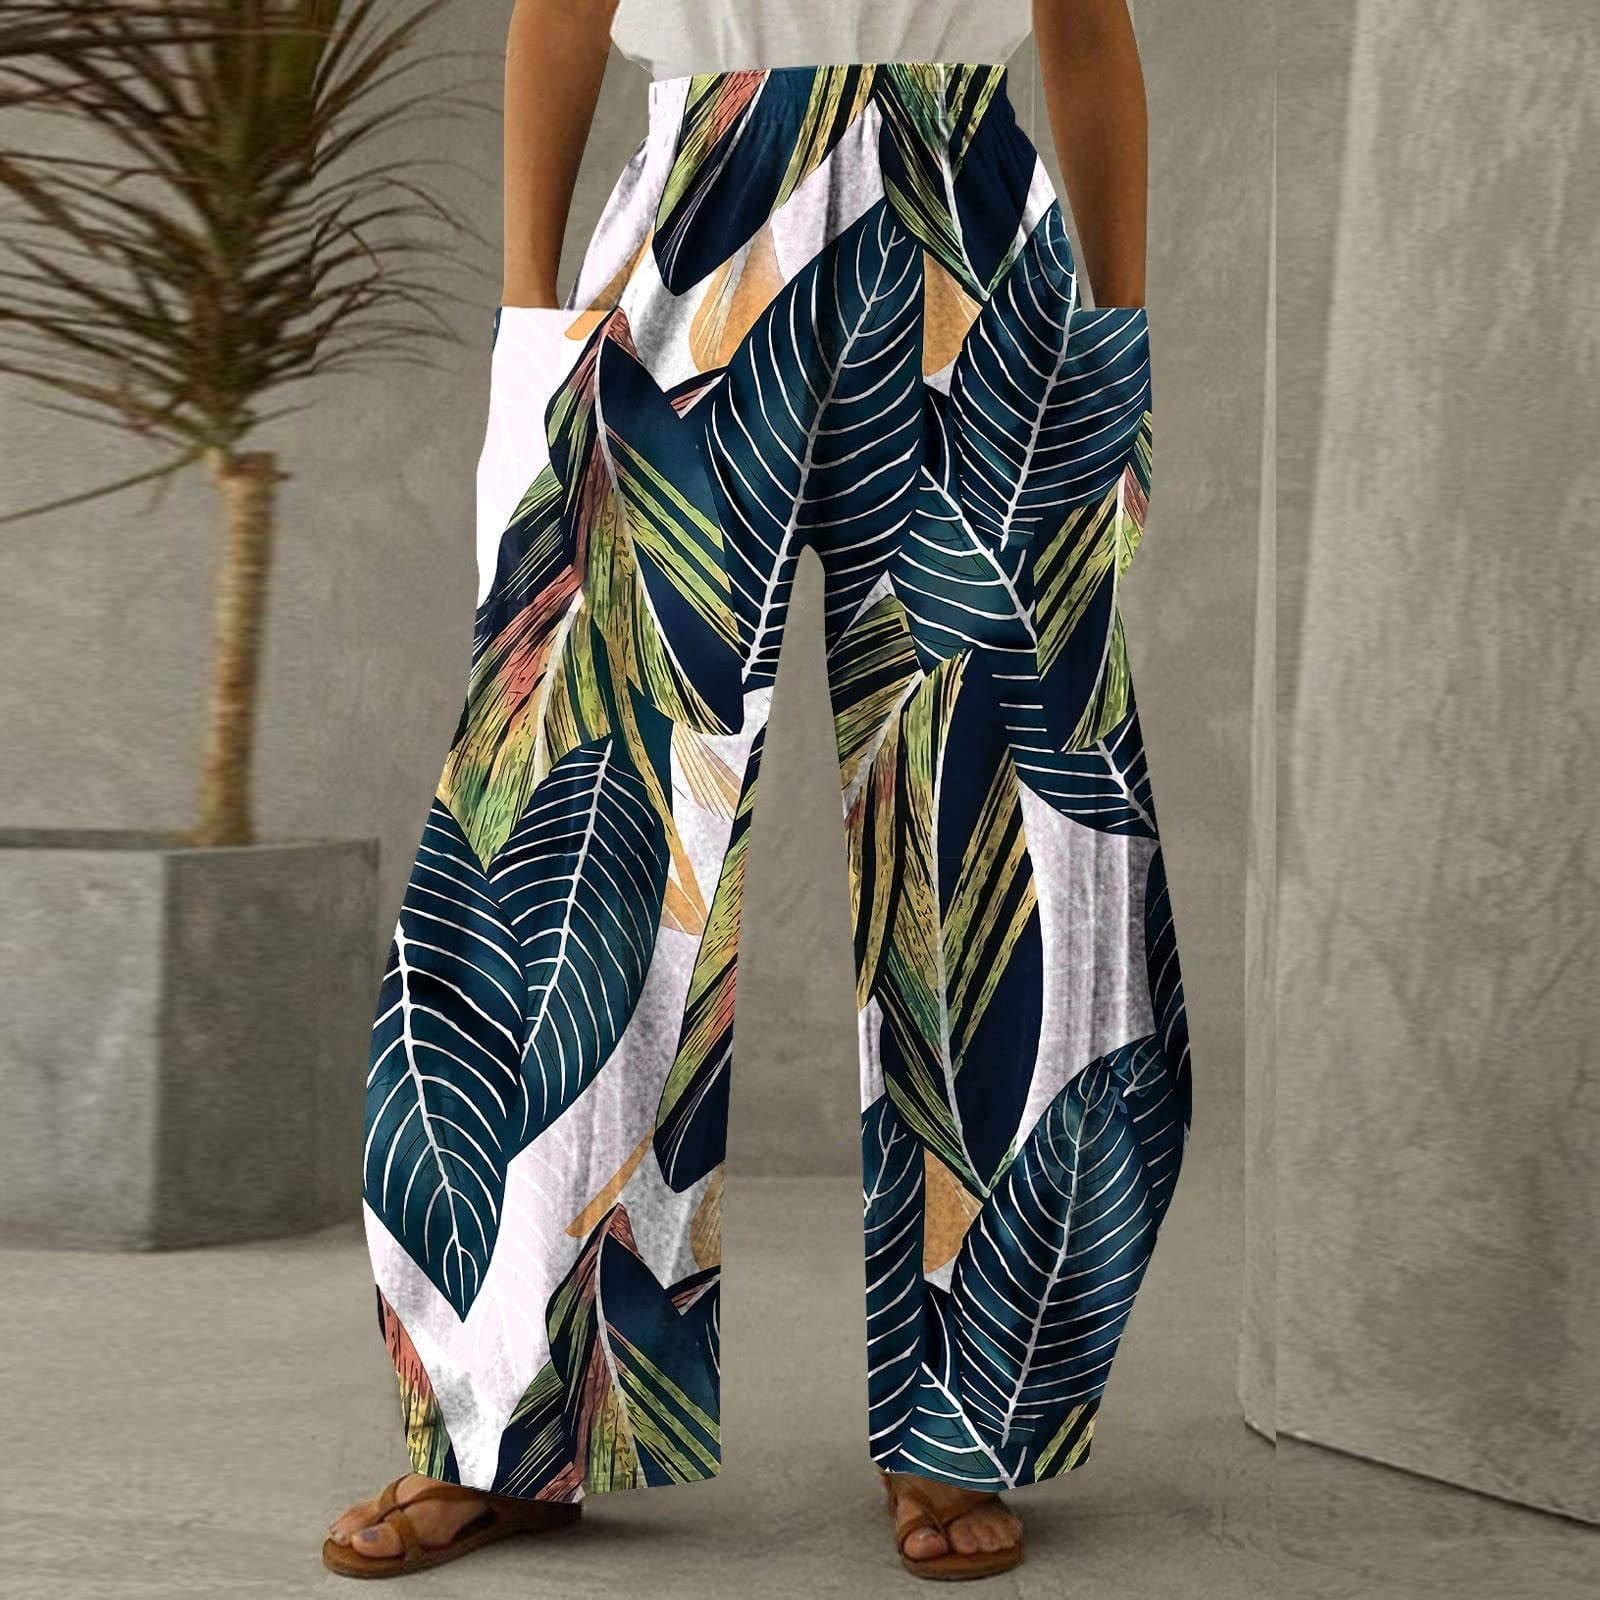 Women Casual Beach Wide Leg Trousers Elastic Waist Vintage Floral Print  Trousers Long Palazzo Pants with Pockets